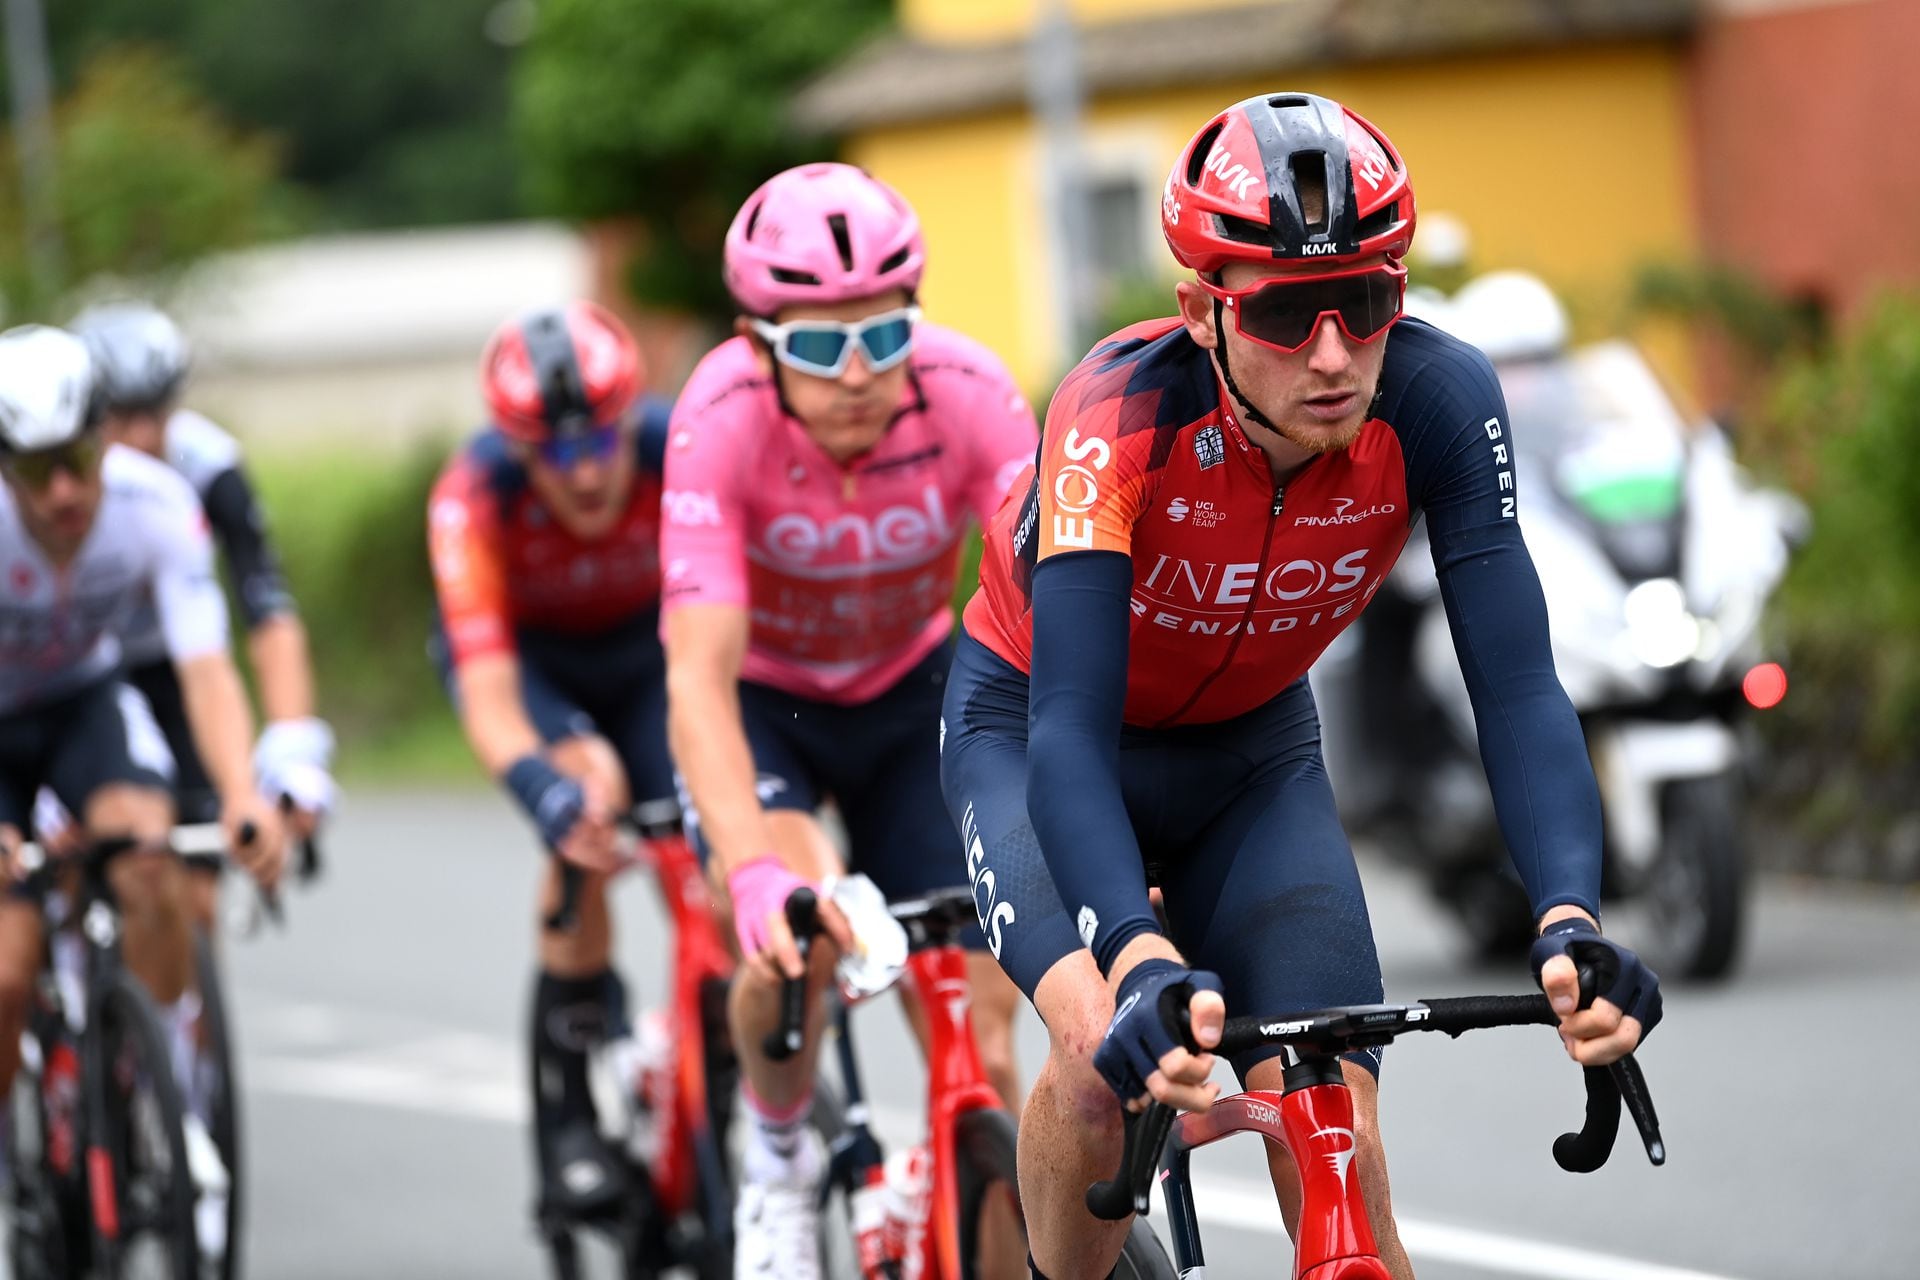 TORTONA, ITALY - MAY 17: Tao Geoghegan Hart of The United Kingdom and Team INEOS Grenadiers competes during the 106th Giro d'Italia 2023, Stage 11 a 219km stage from Camaiore to Tortona / #UCIWT / on May 17, 2023 in Tortona, Italy. (Photo by Tim de Waele/Getty Images)